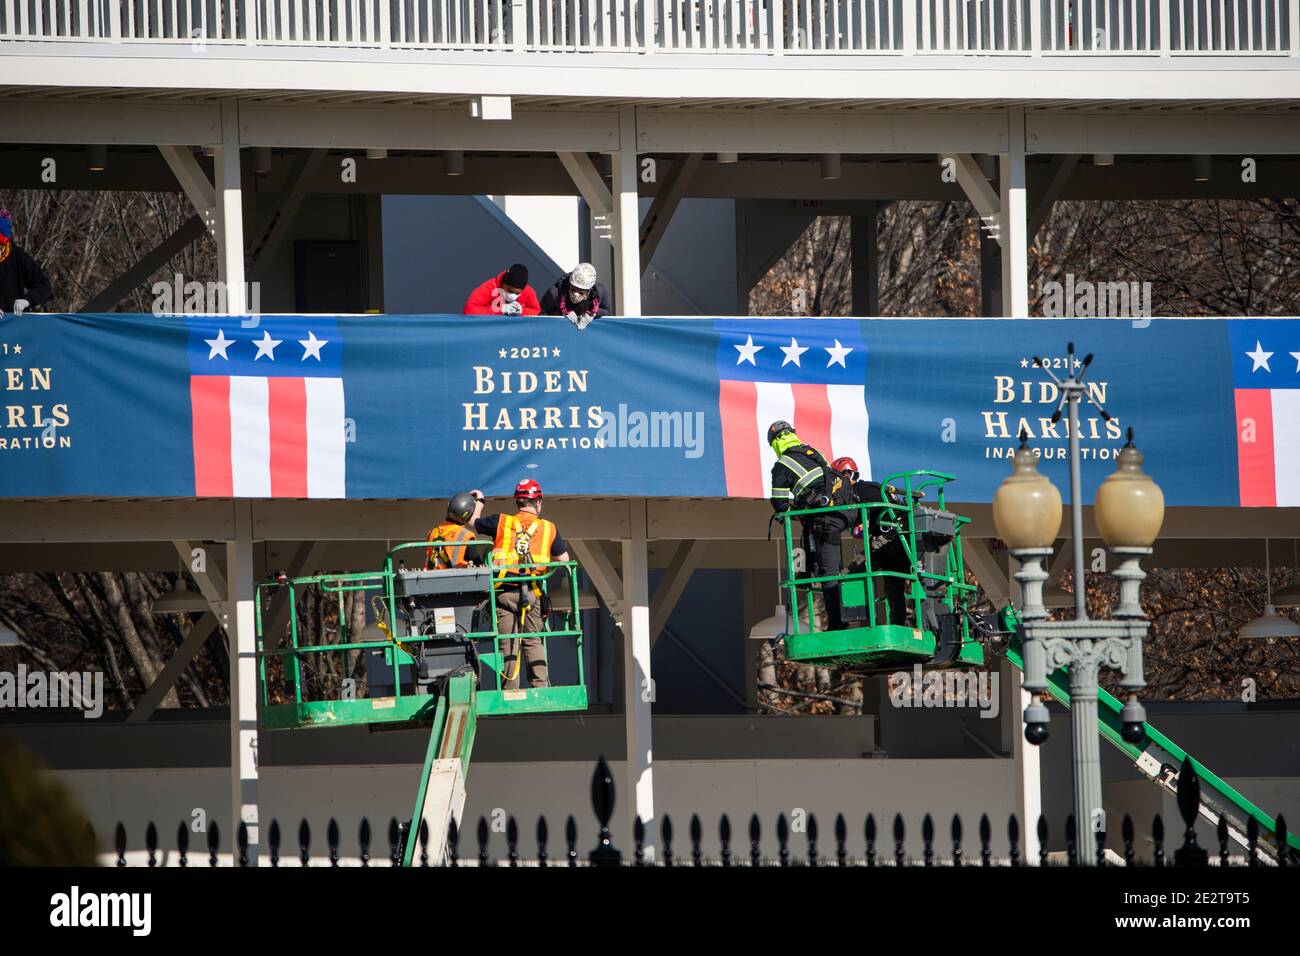 Workers hang bunting from a media riser for President-elect Joe Biden's inauguration parade outside the White House in Washington, DC, USA, 14 January 2021.Credit: Jim LoScalzo/Pool via CNP /MediaPunch Stock Photo